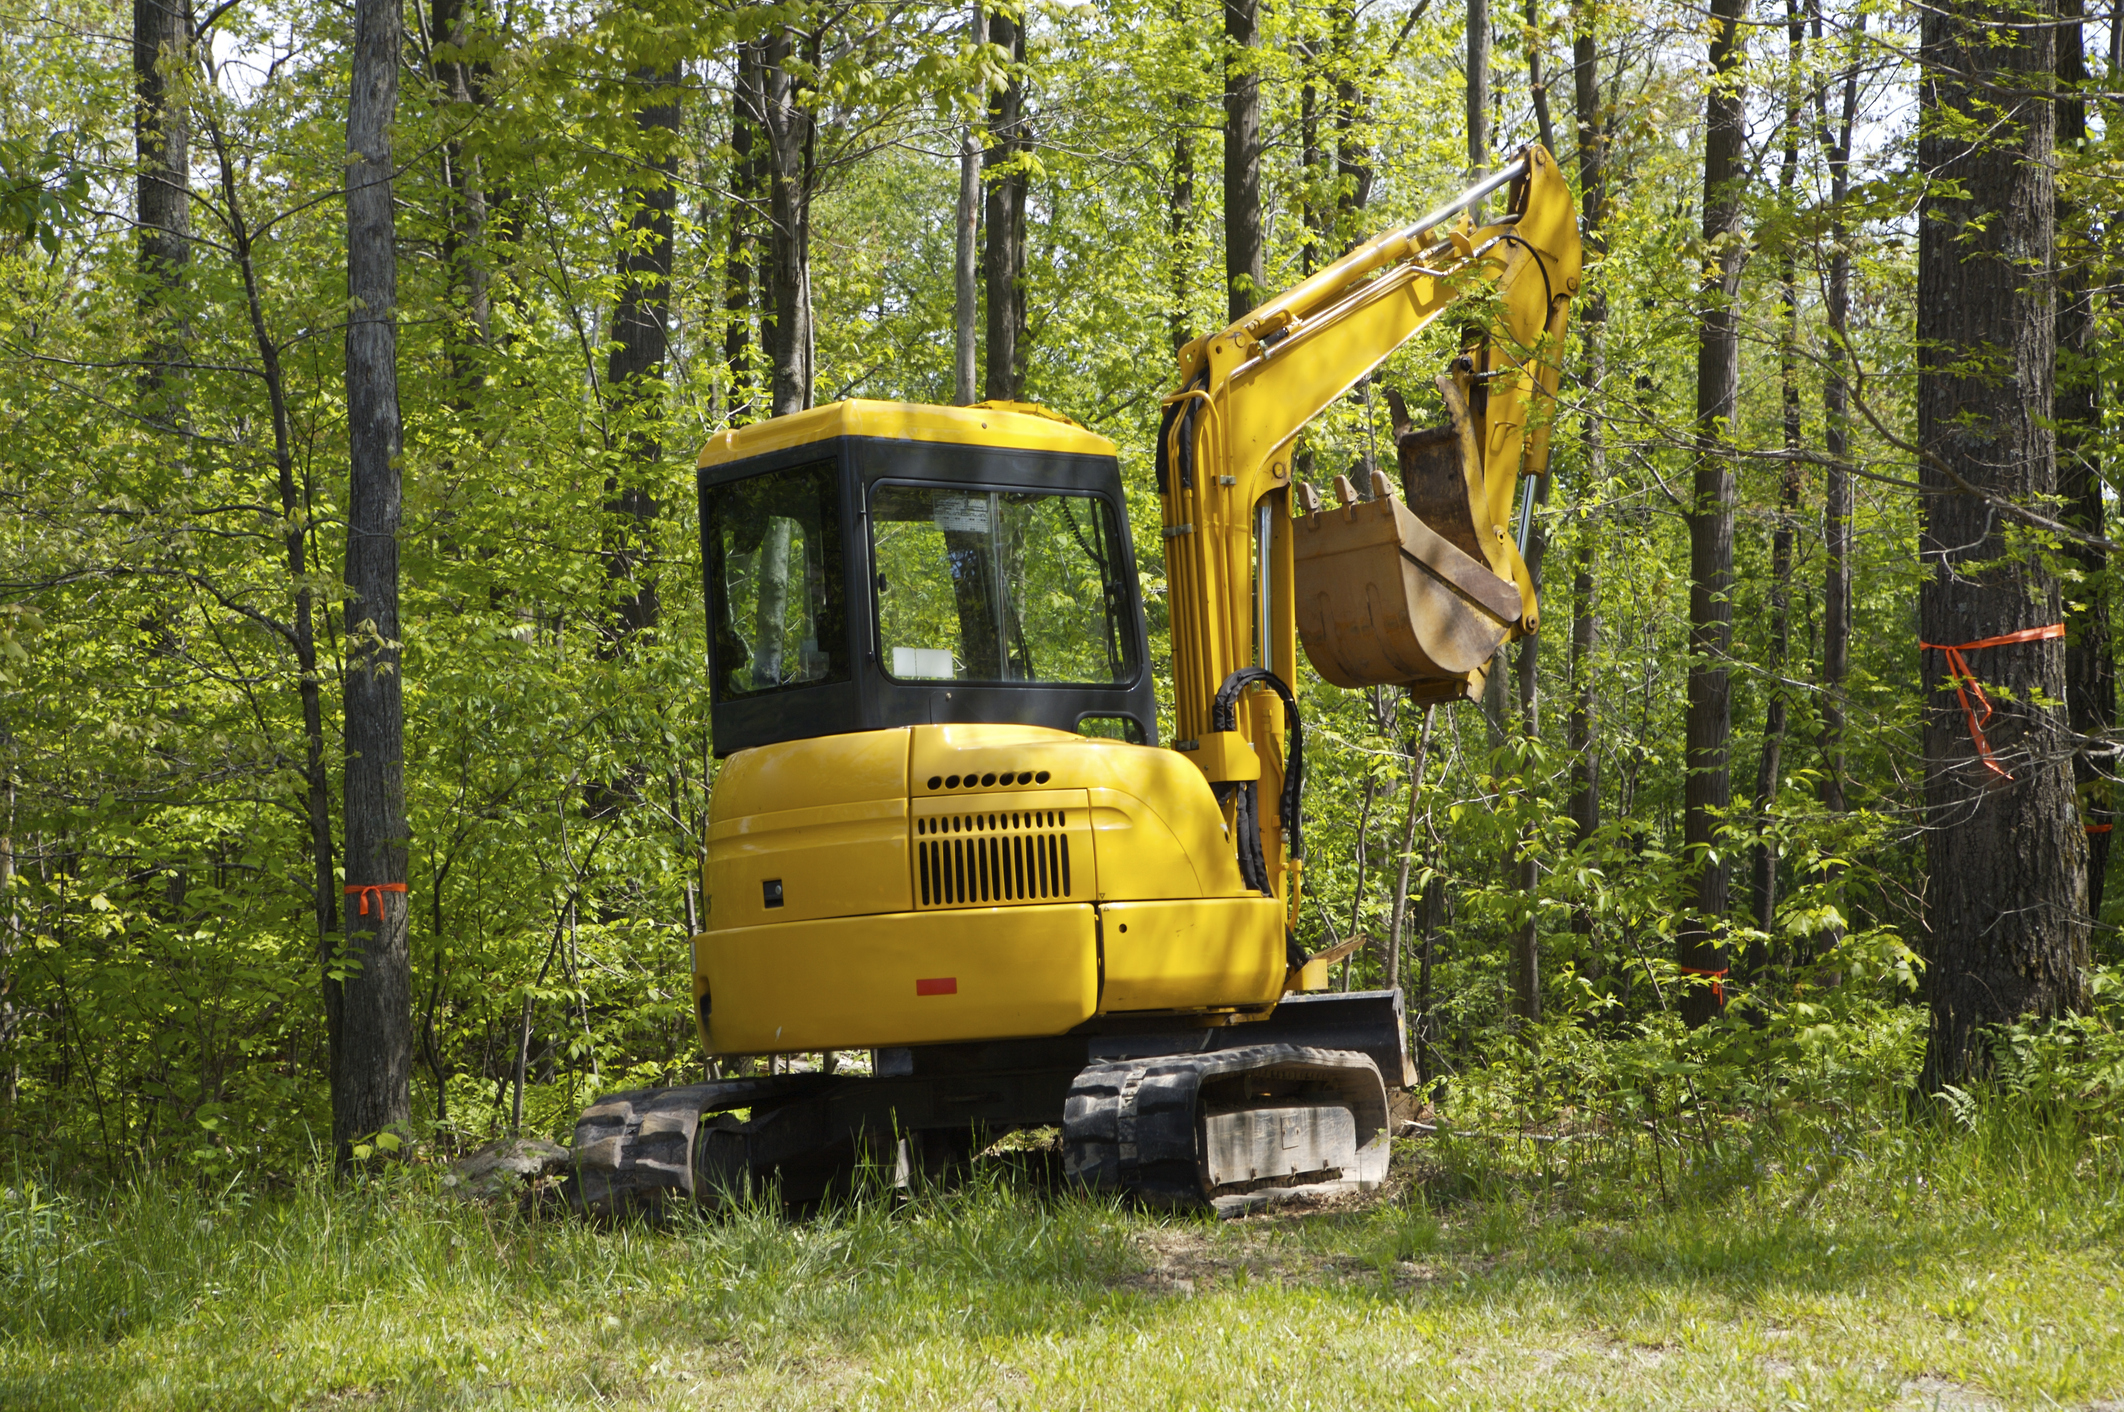 Prevent Overheating with Best Practices for Mini Excavator Attachments